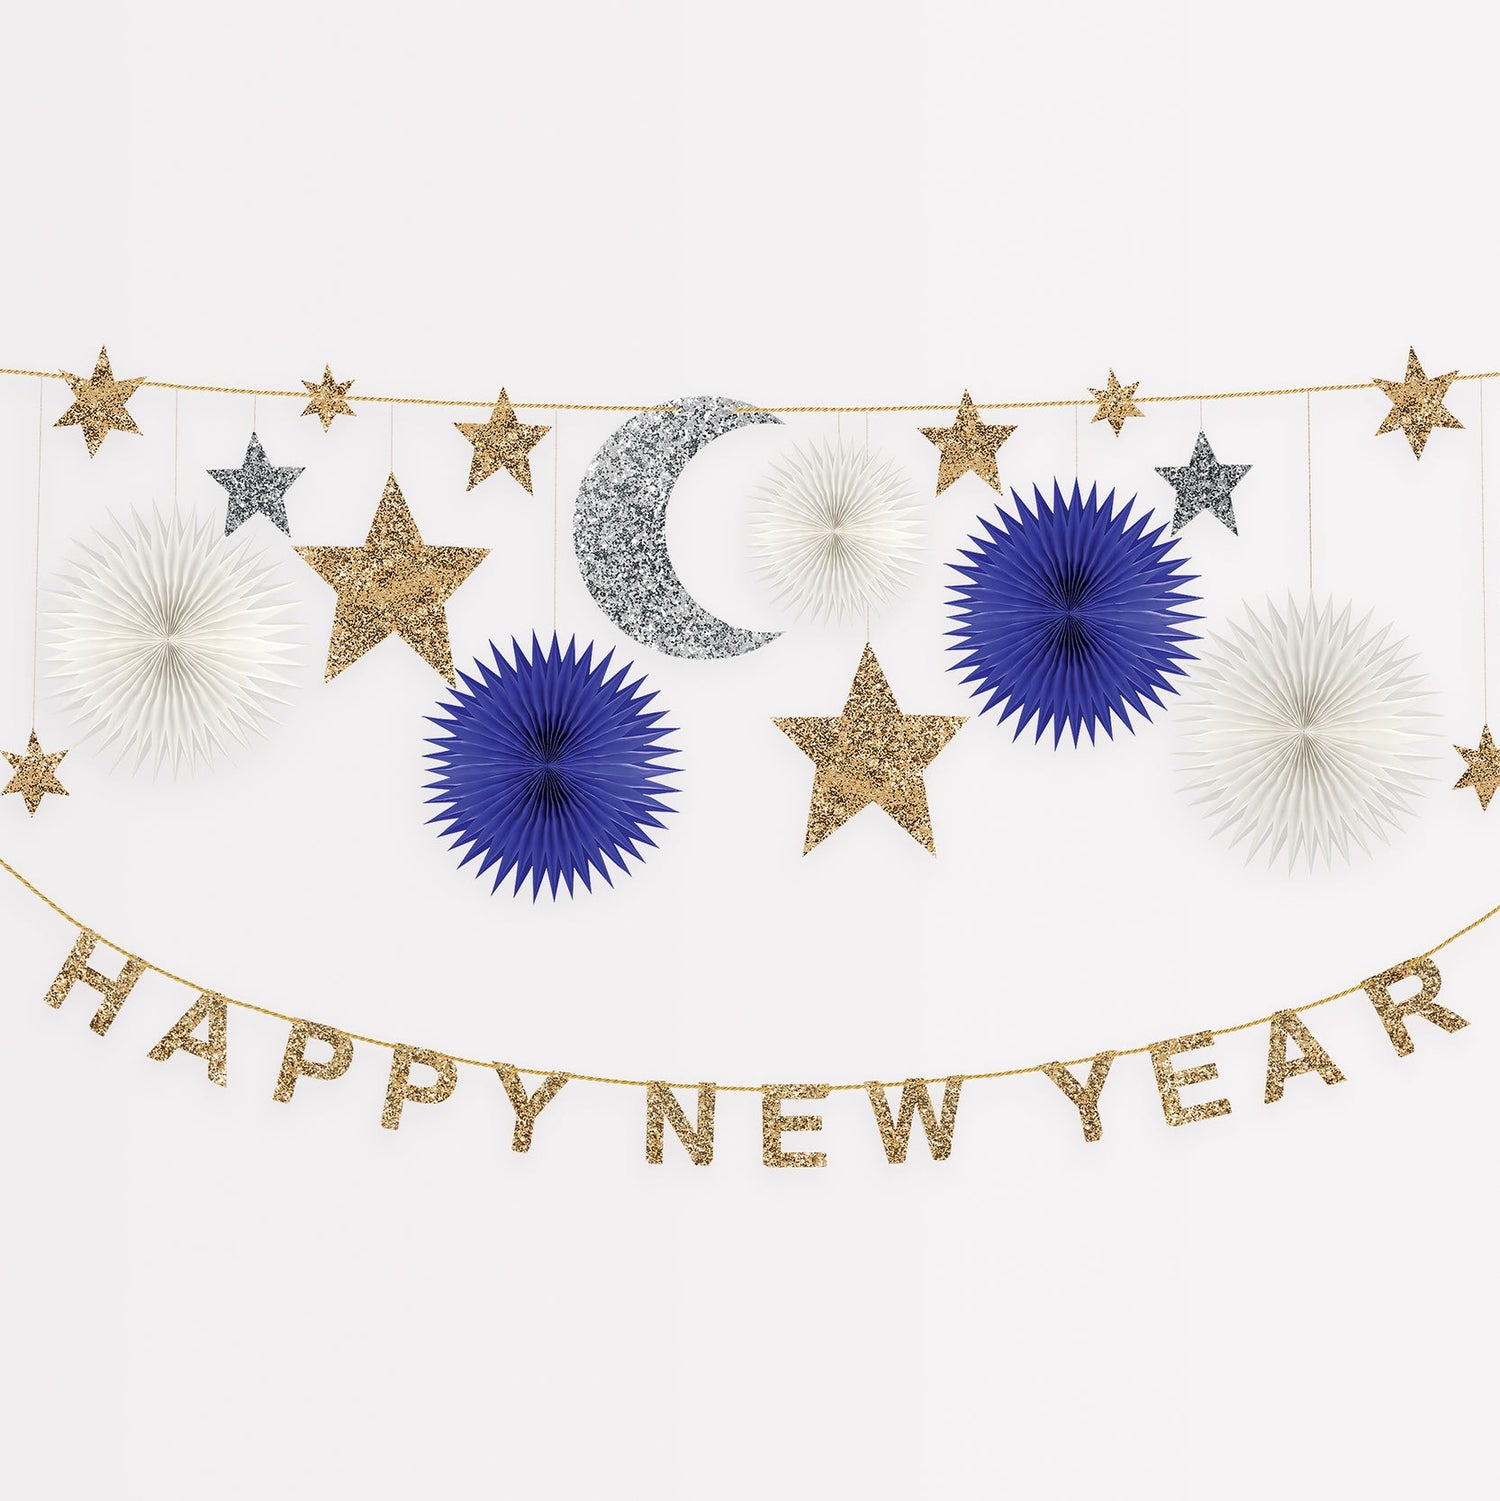 A festive Celestial New Year Garland comprising a banner with the words &quot;happy New Year&quot; in gold lettering, flanked by blue and silver paper fans and gold and silver stars by Meri Meri.